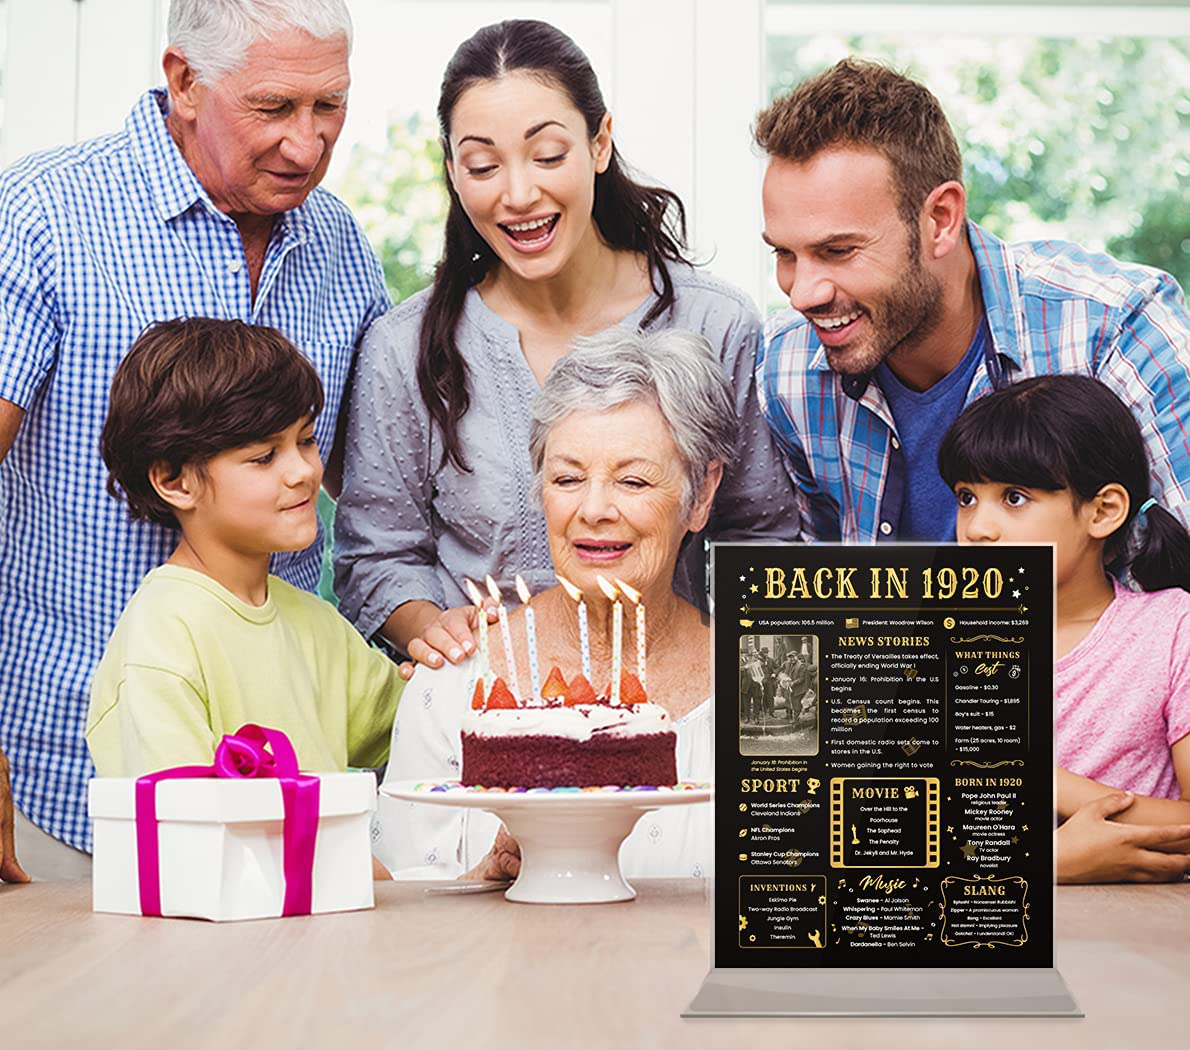 Back in 1954 Poster - [Unframed 8x10] - 67th Birthday Gifts for Woman or Man - funny Gifts Ideas for Grandma and Grandpa - Black Birthday Poster - Birthday Decorations